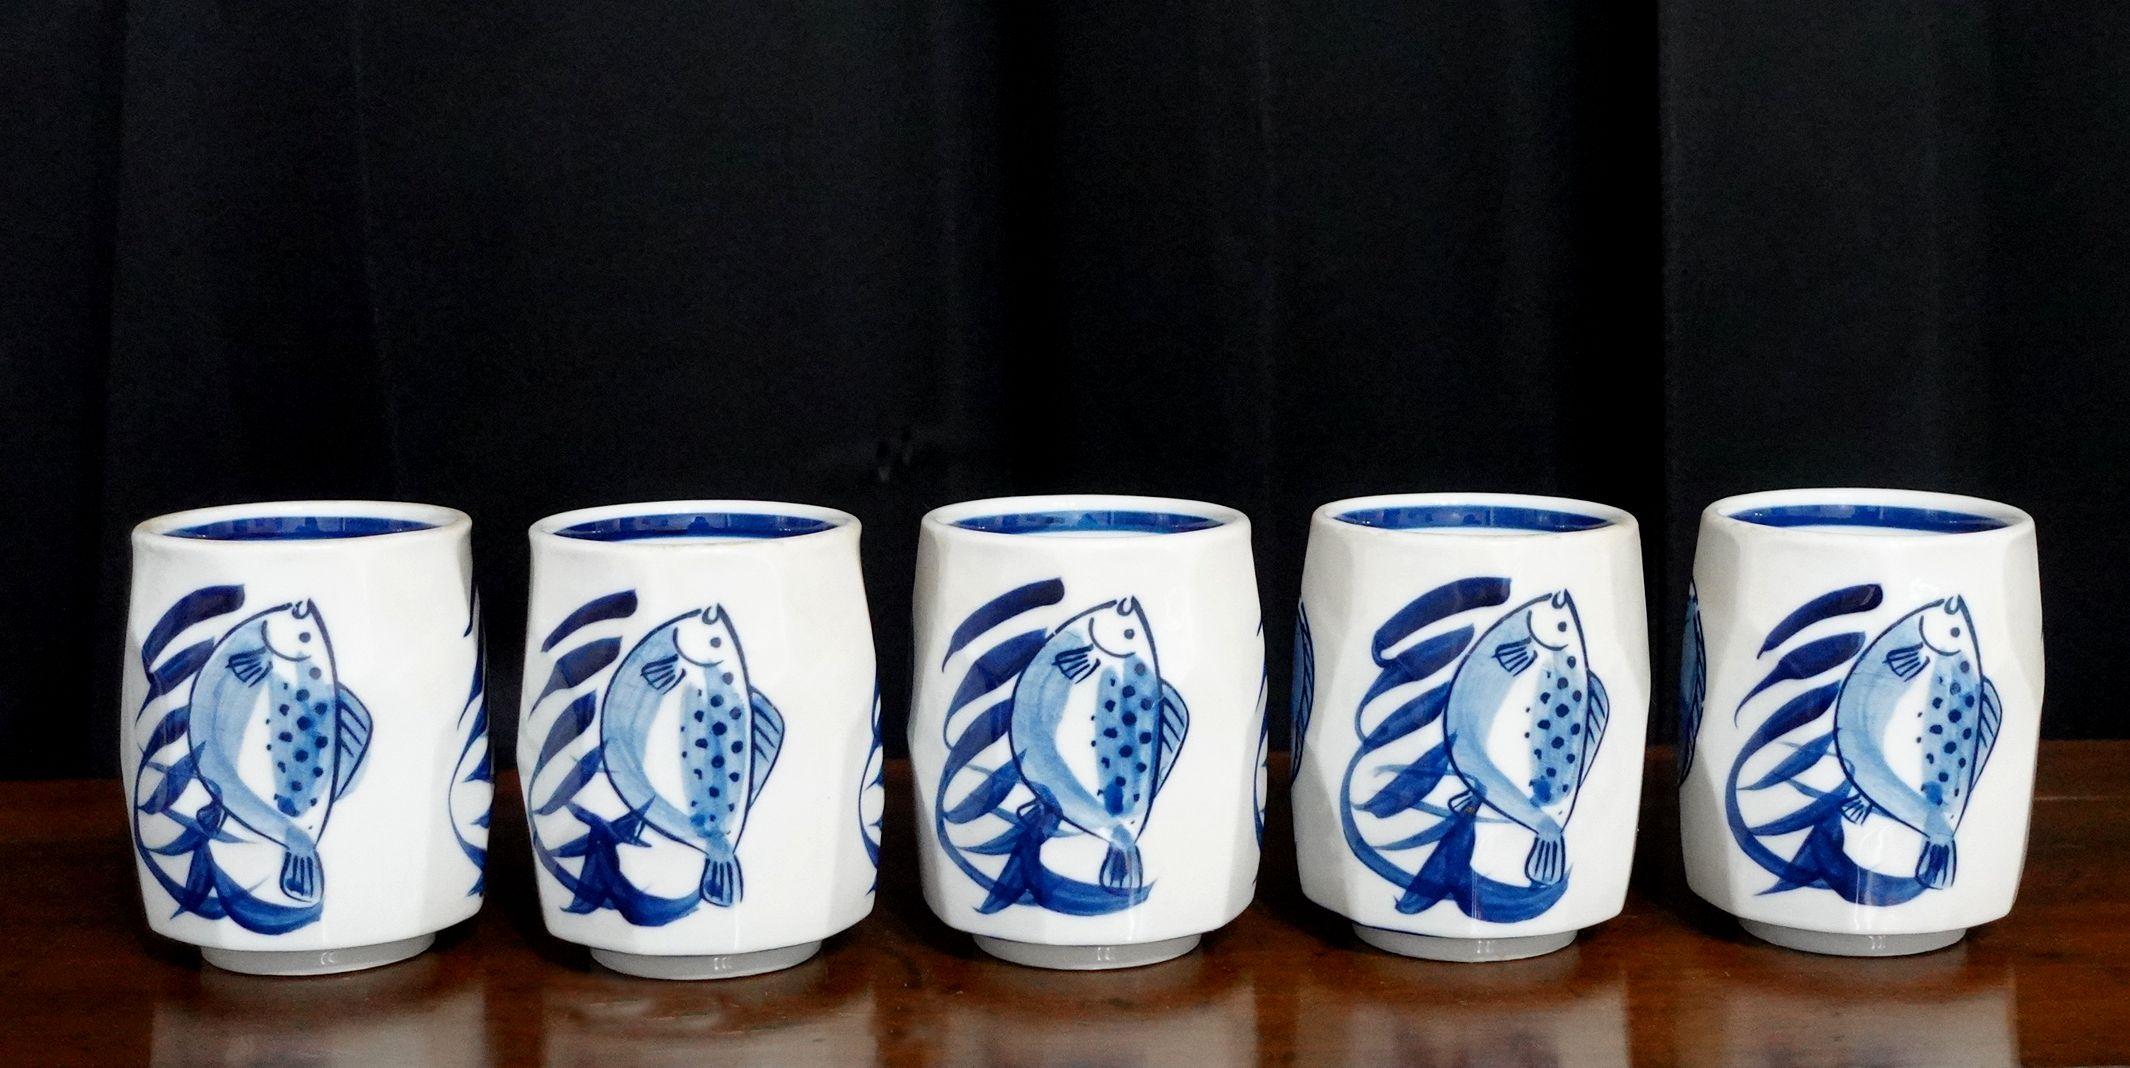 5 large Japanese blue and white tea cups of mid-century studio pottery,
depicting large fishes and shrimps.
In good original new condition and just found in the warehouse, never used before.